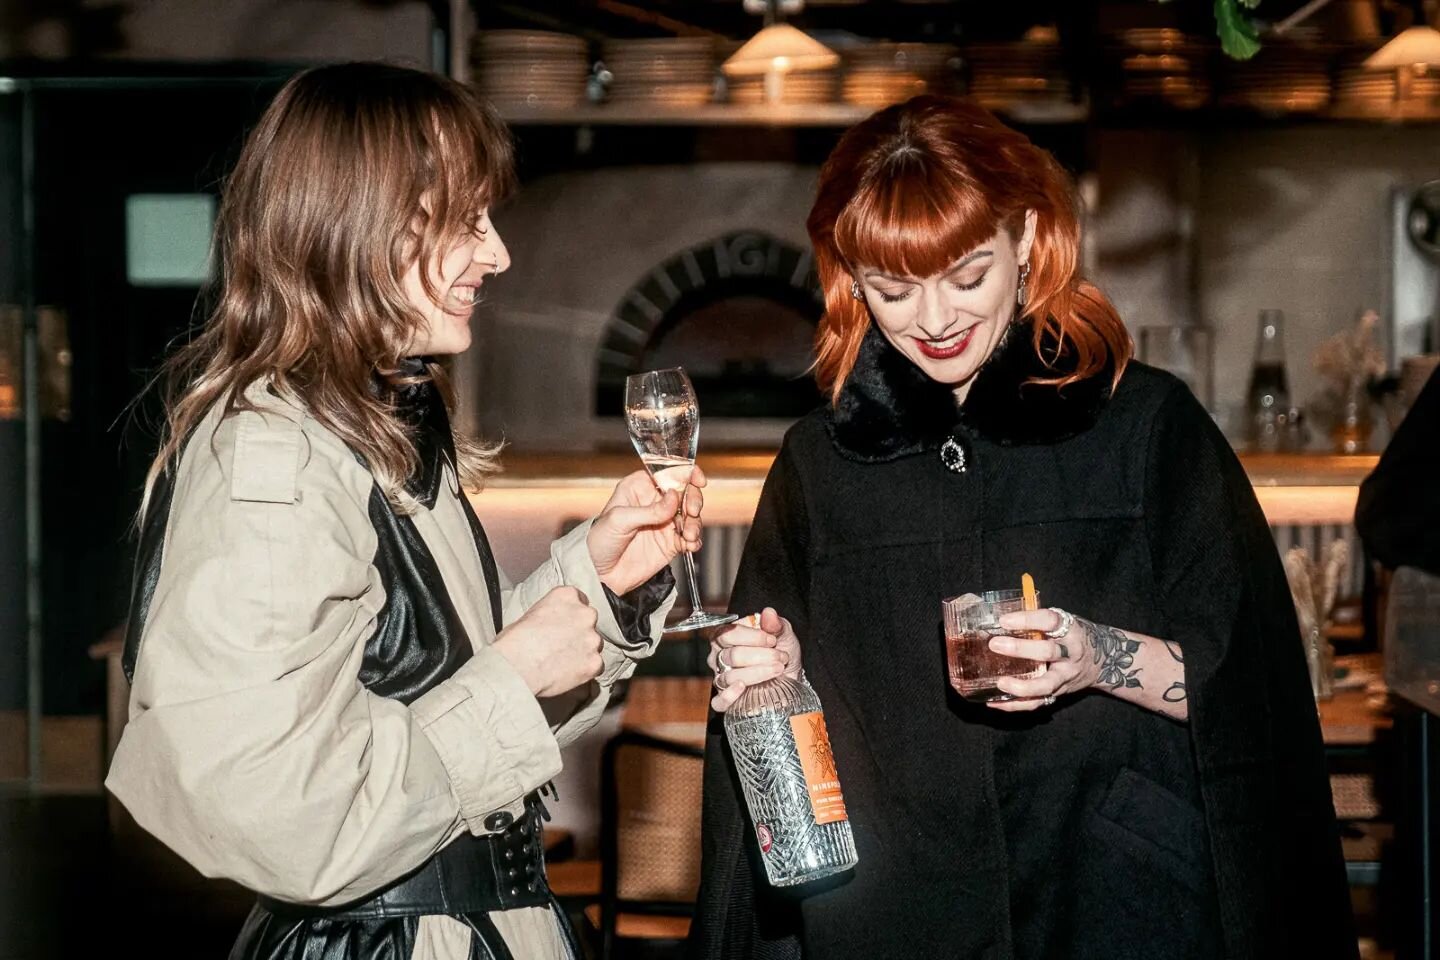 Happy International Women's Day!

To wonderful women everywhere, we thank you and celebrate you 🙌 

Cis, trans or presenting, you'll always be welcome in our fold ❤️

#Ninefoldrum #welcometothefold #internationalwomensday #scottishrum #rum